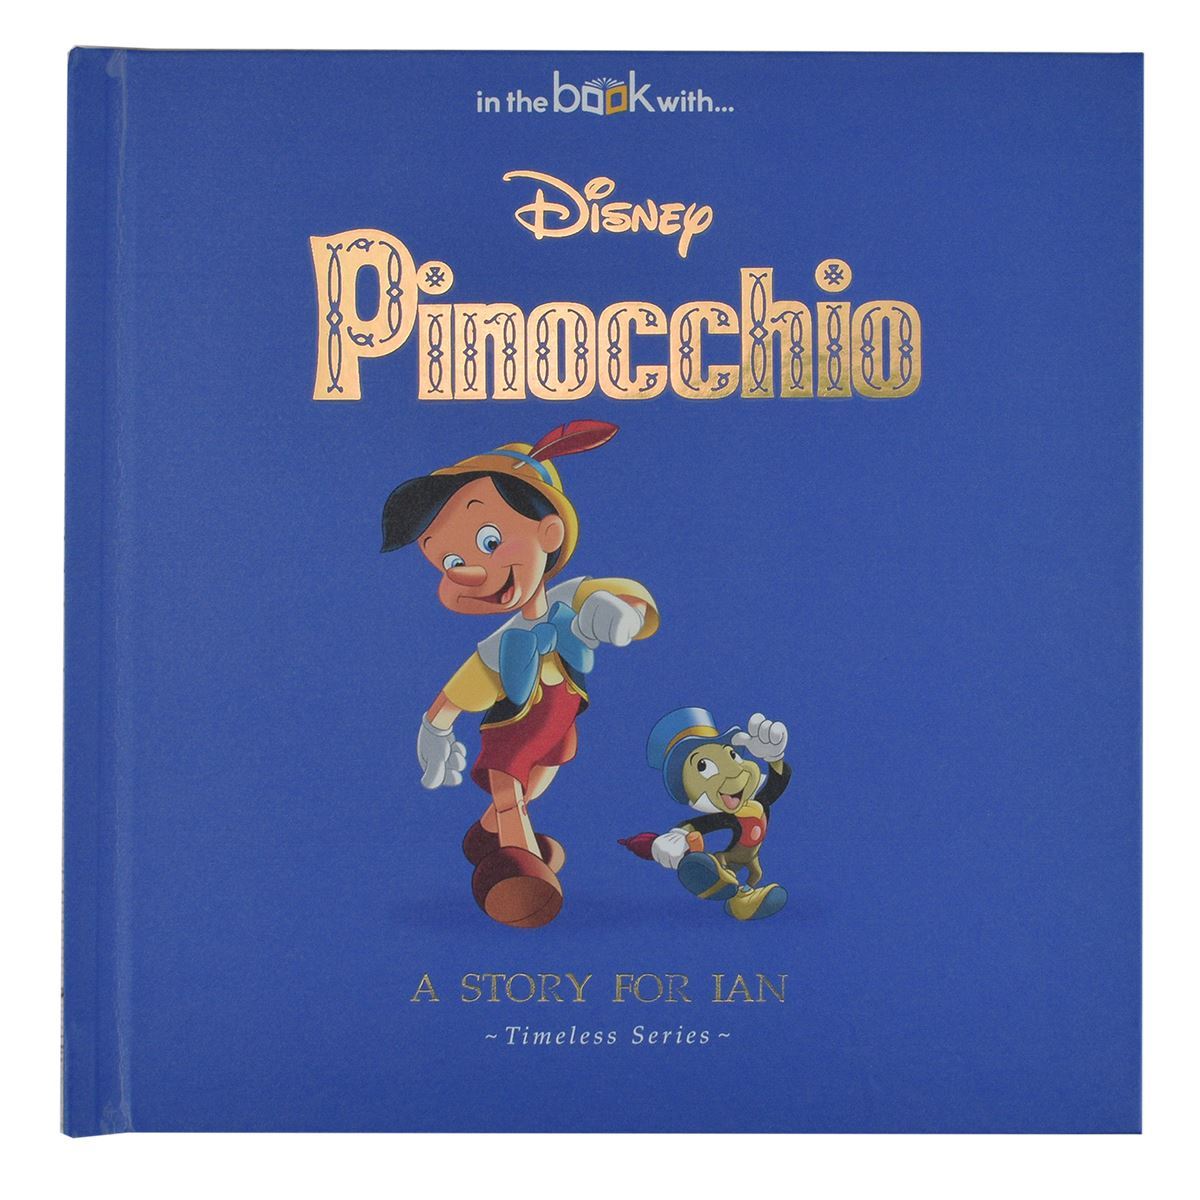 pinocchio story book with pictures pdf